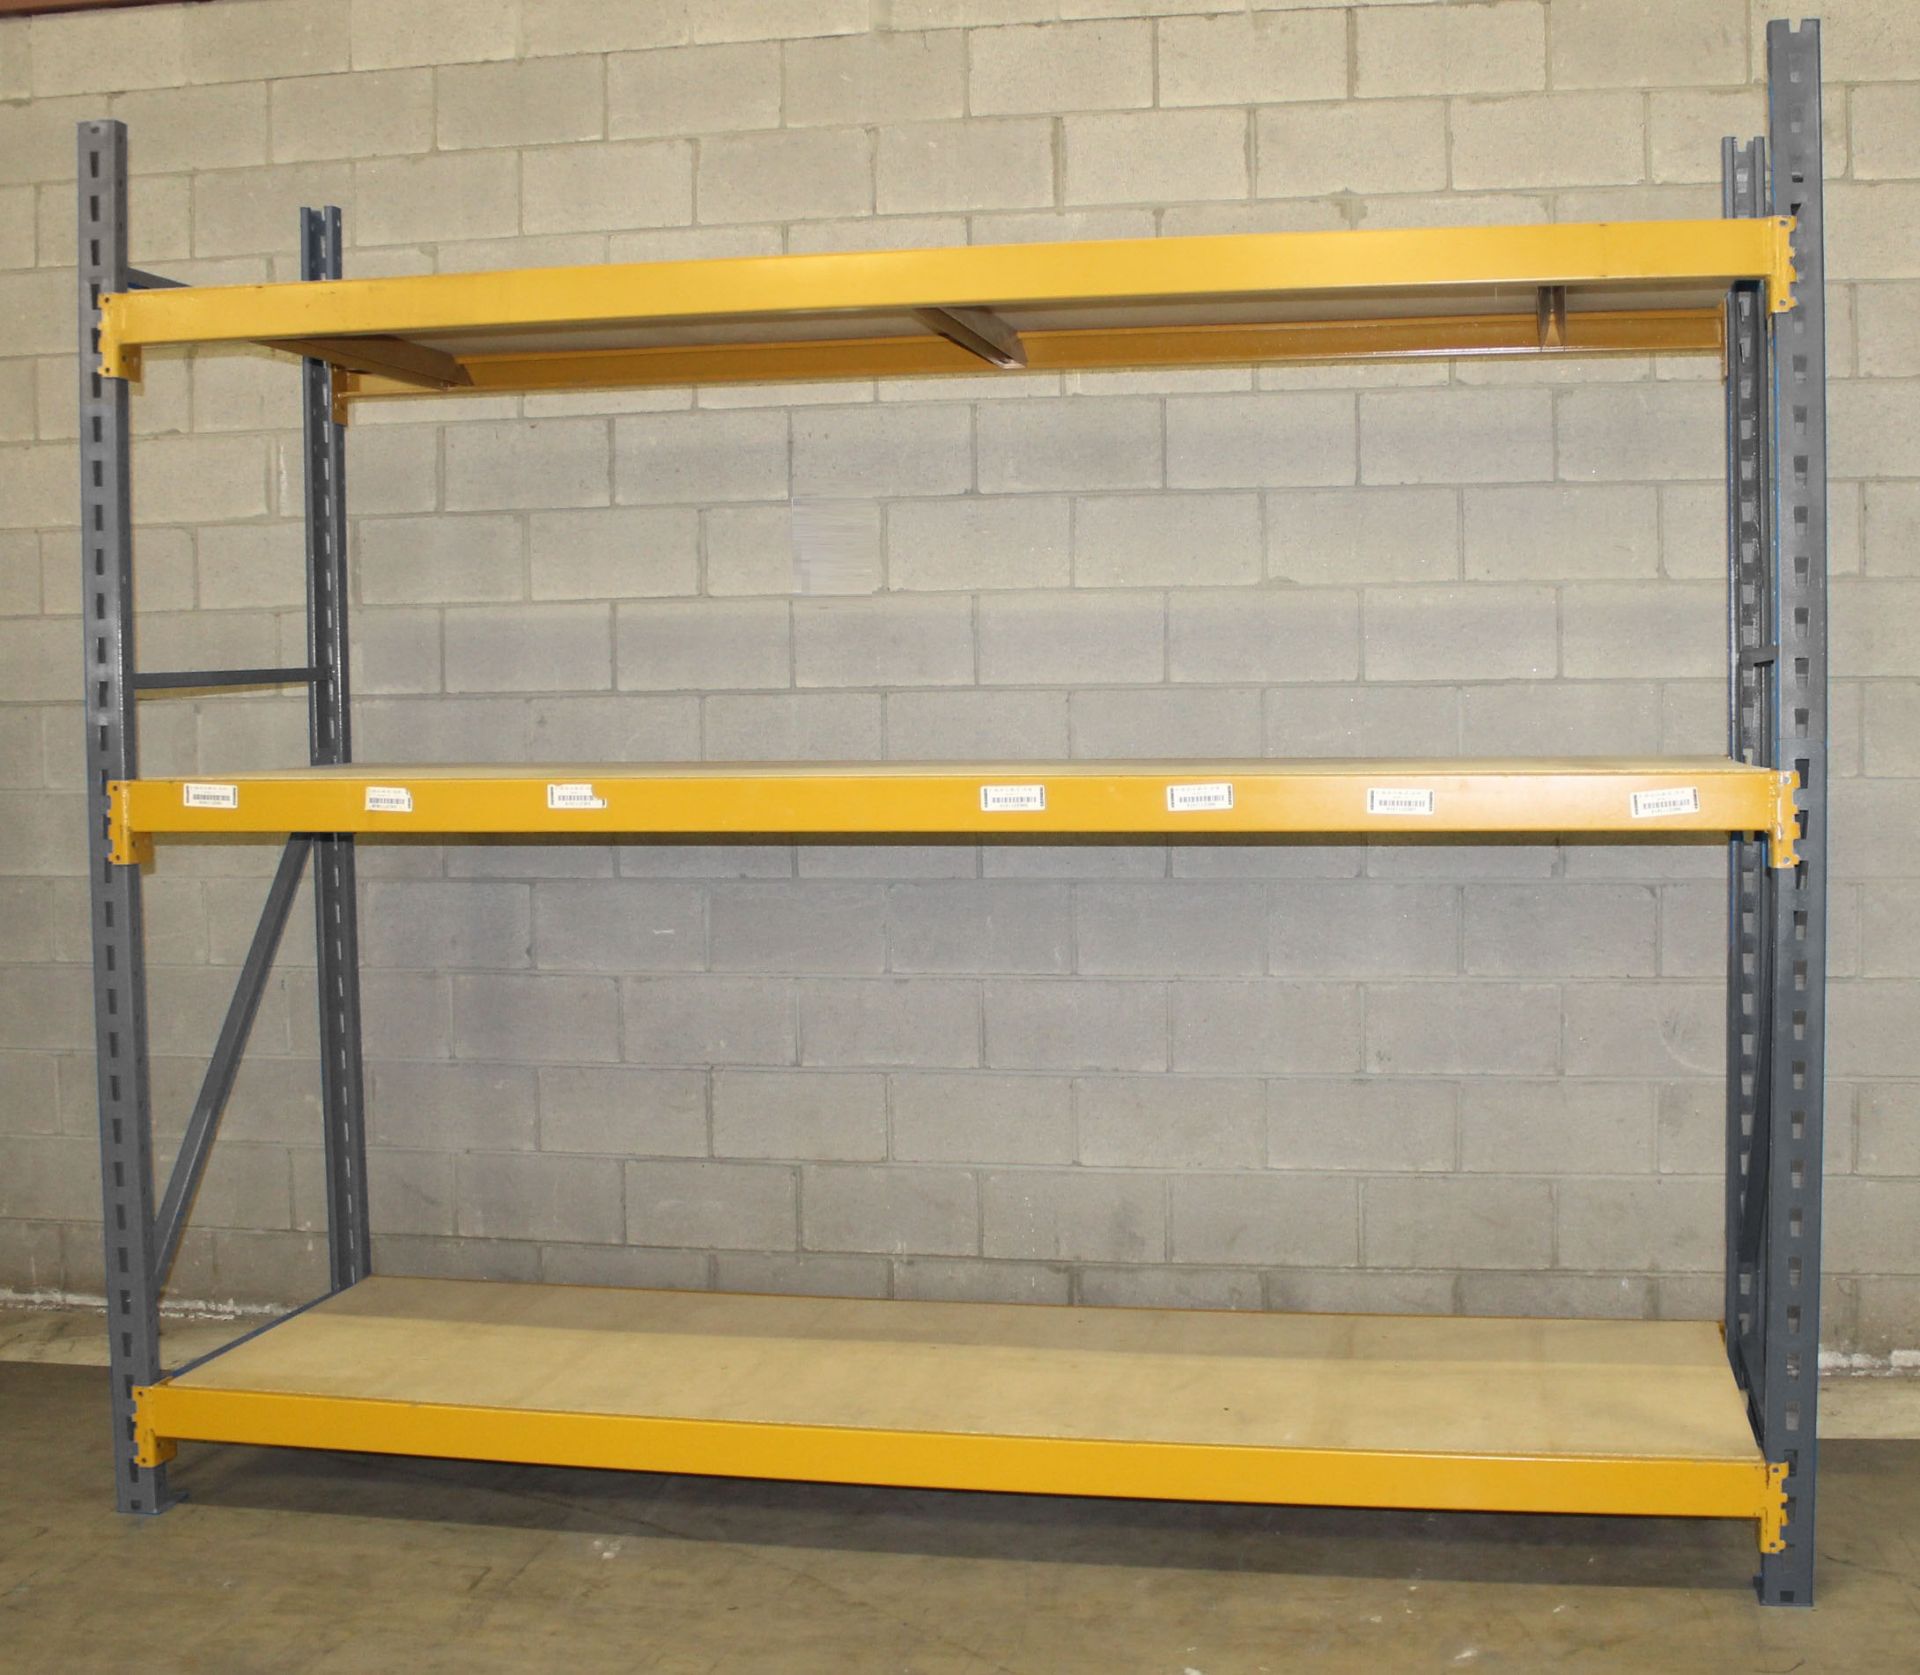 10 SECTIONS OF 96"H X 32"D X 108"L STOCK ROOM PALLET RACK SHELVING,  TOTAL 10 SECTIONS, 1 ROWS - Image 5 of 5